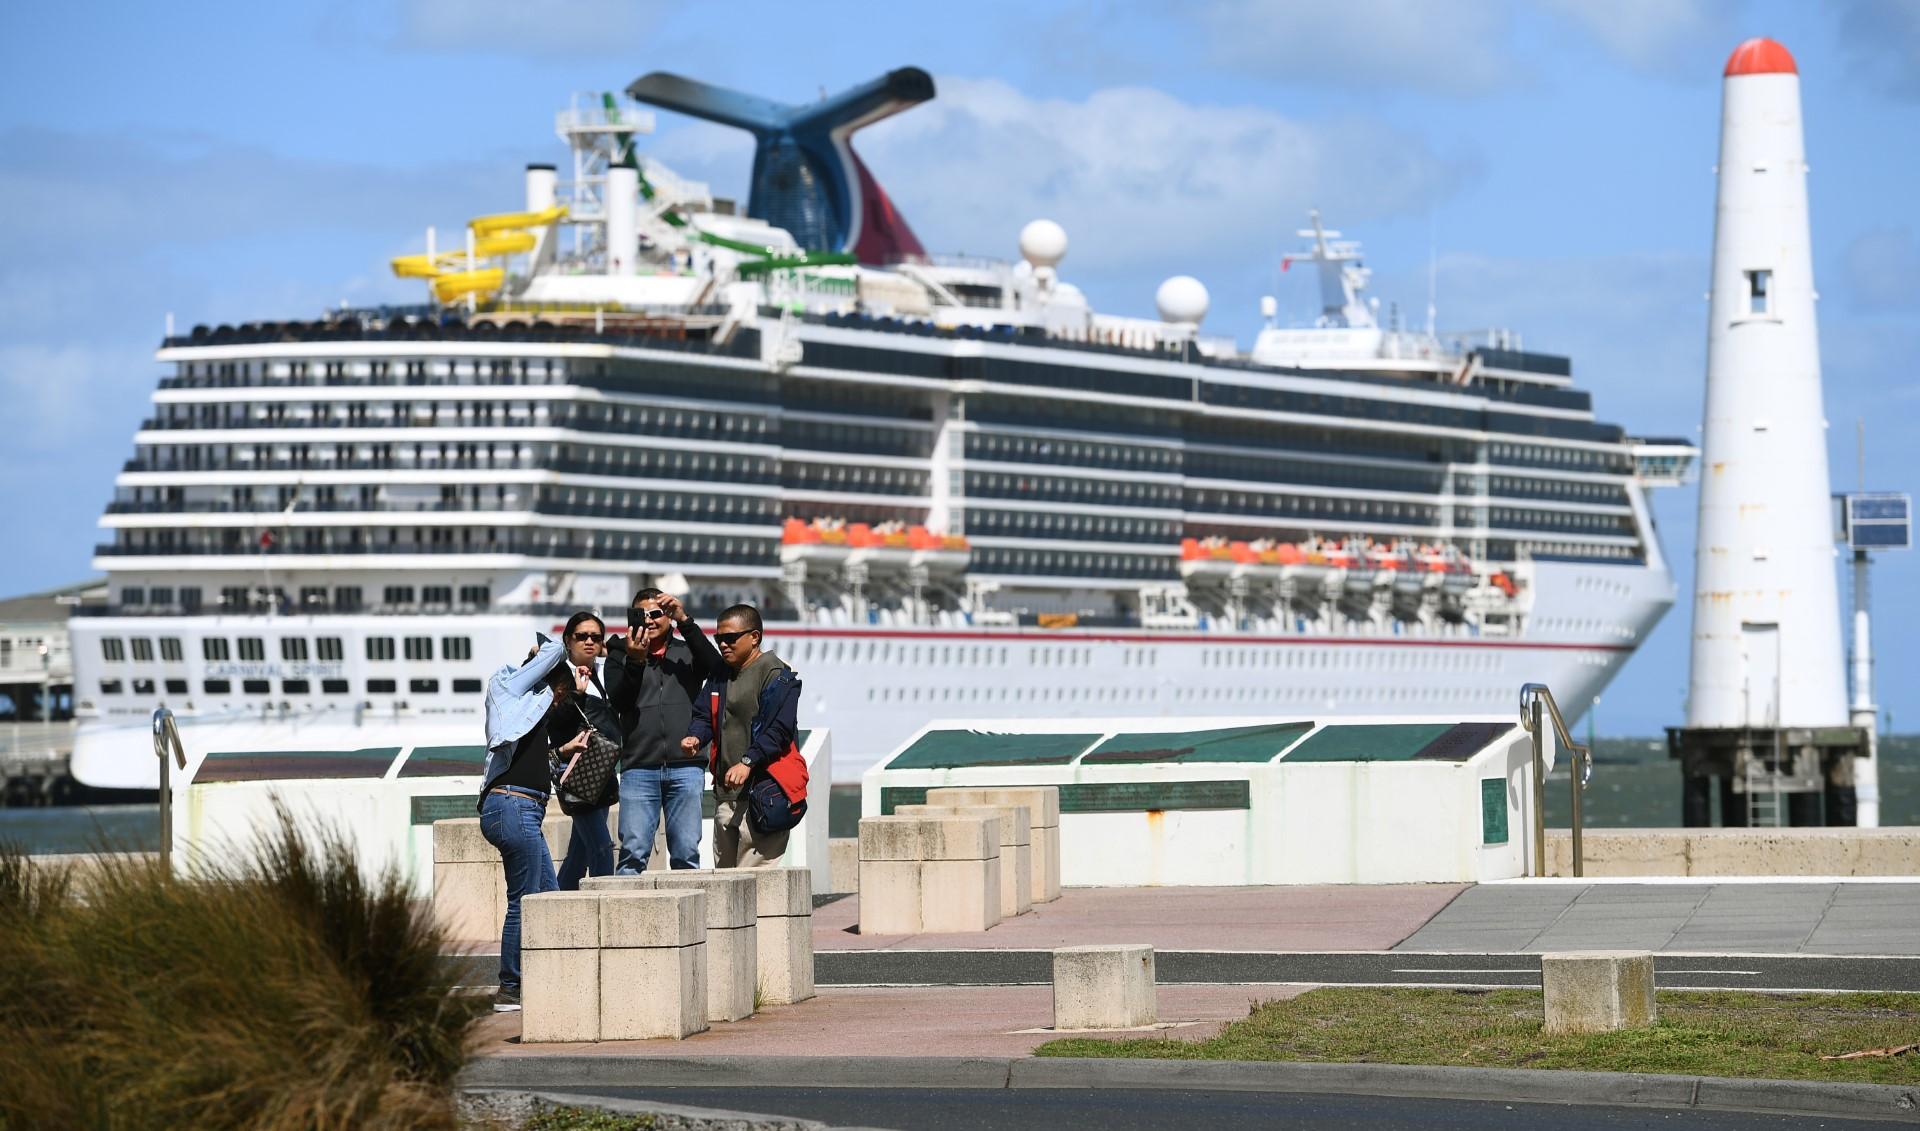 A photo taken in Melbourne on March 14, 2020 shows tourists taking photos in front of a cruise liner docked at Station Pier as Australian Prime Minister Scott Morrison on March 15 announces all cruise ships will be banned entirely from docking in Australia. Photo: AFP